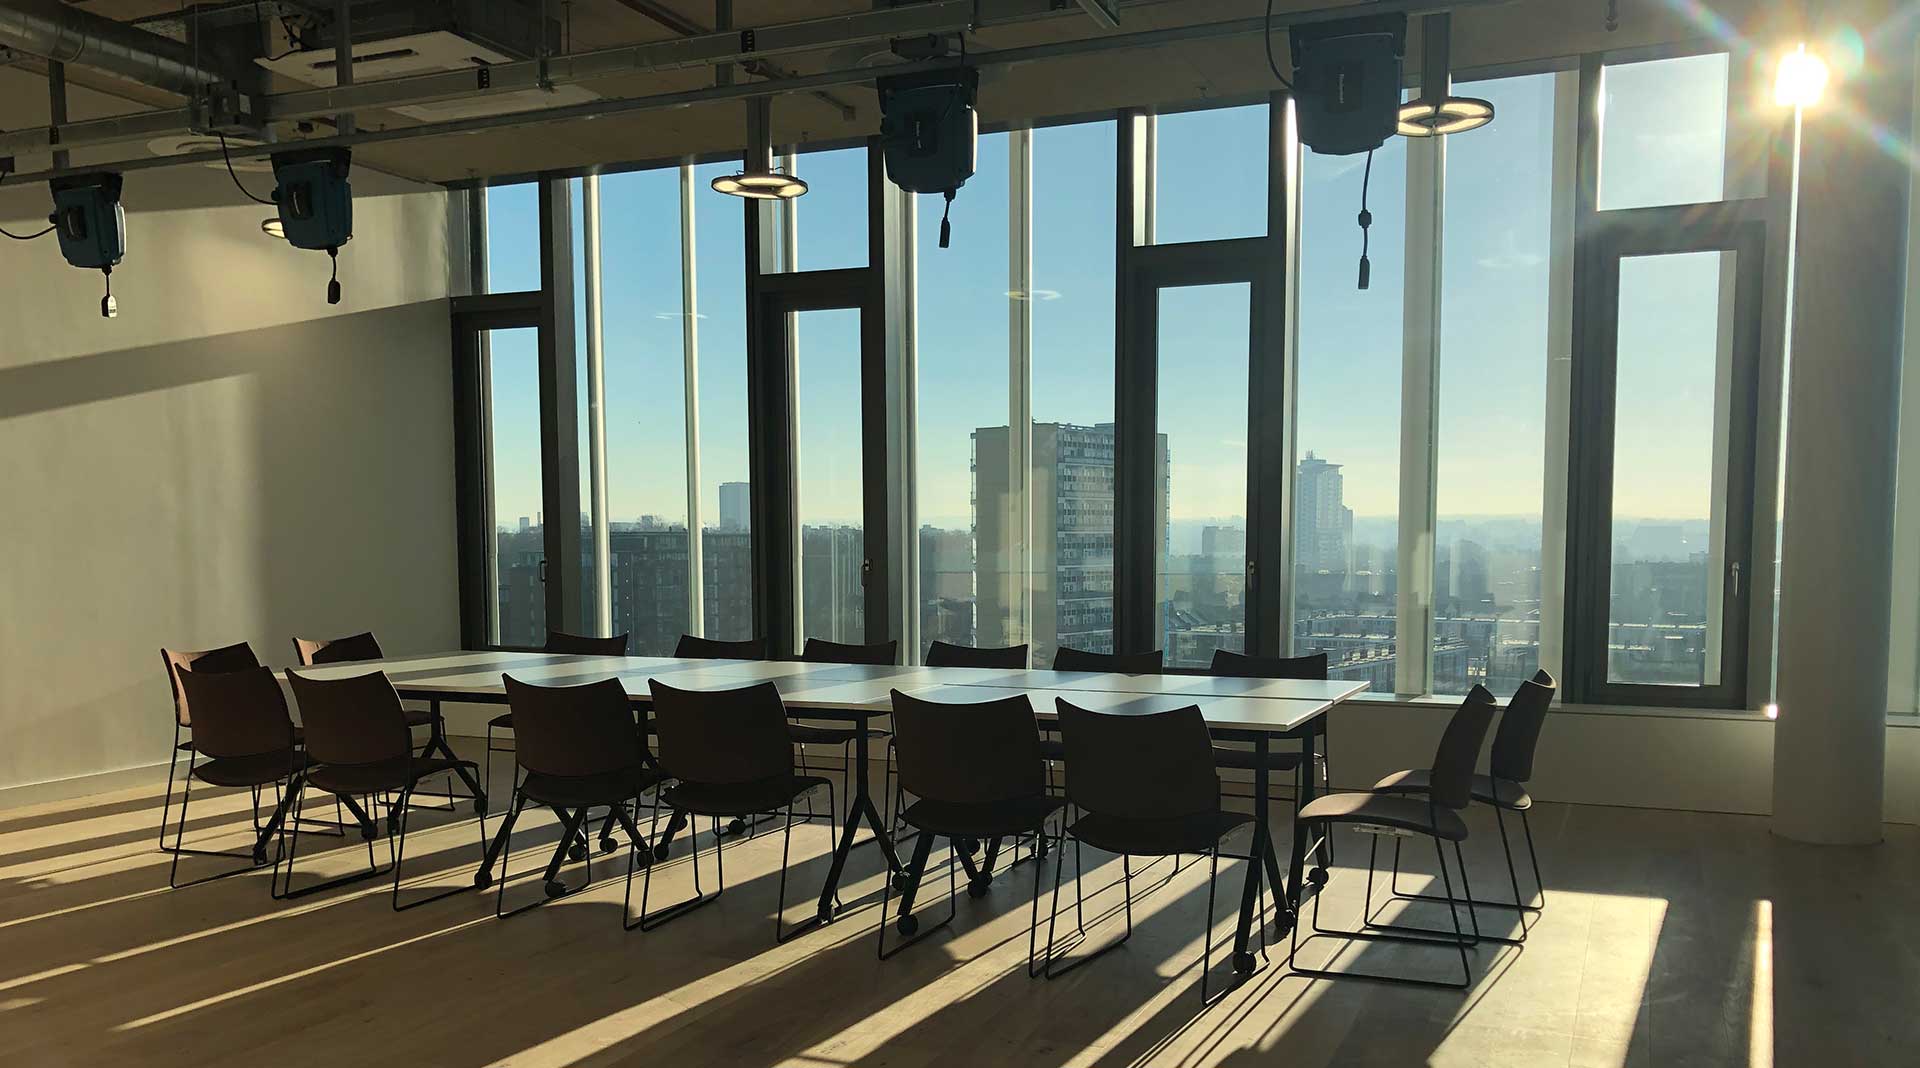 Meeting space at Royal Academy of Art fitted out by ISG, with a window view on sunny London landscape